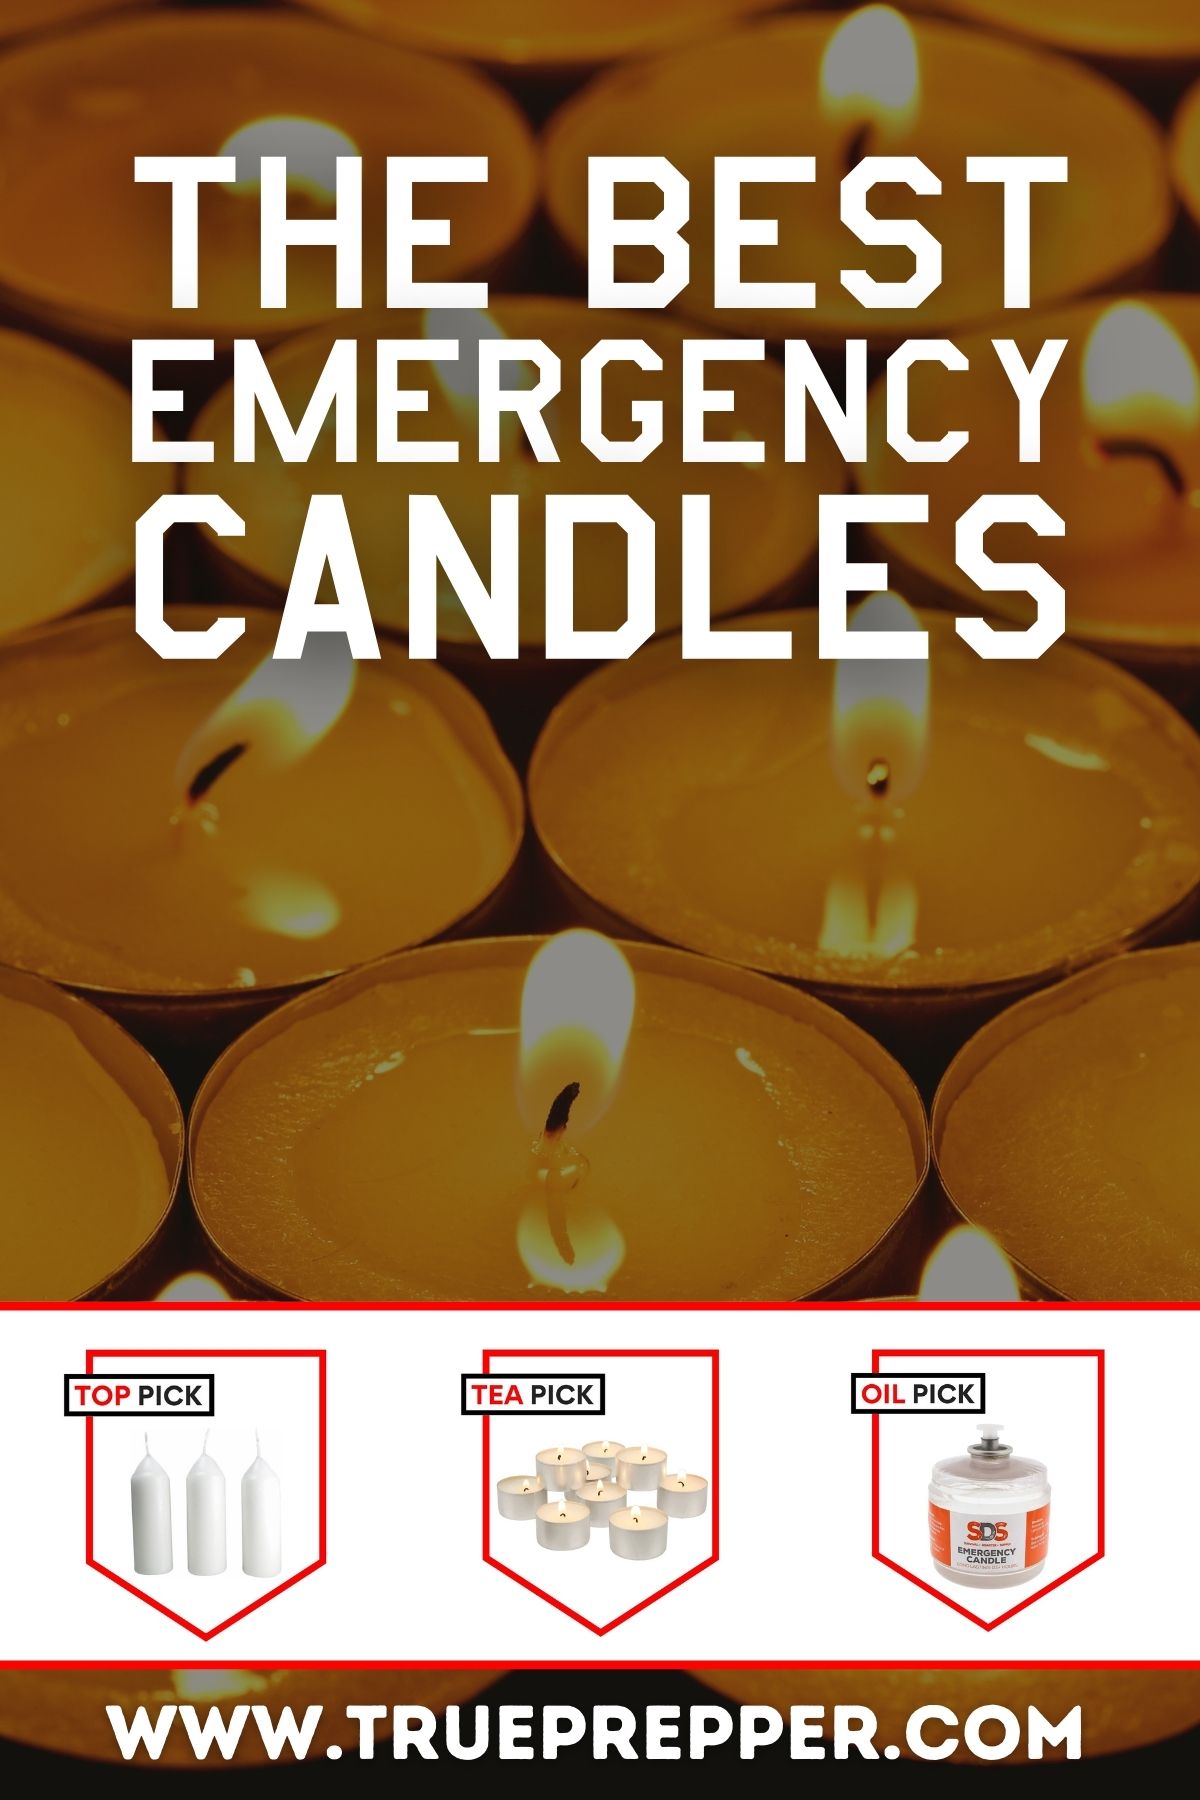 https://www.trueprepper.com/wp-content/uploads/The-Best-Emergency-Candles-for-Survival-Prepping-and-Power-Outages.jpg